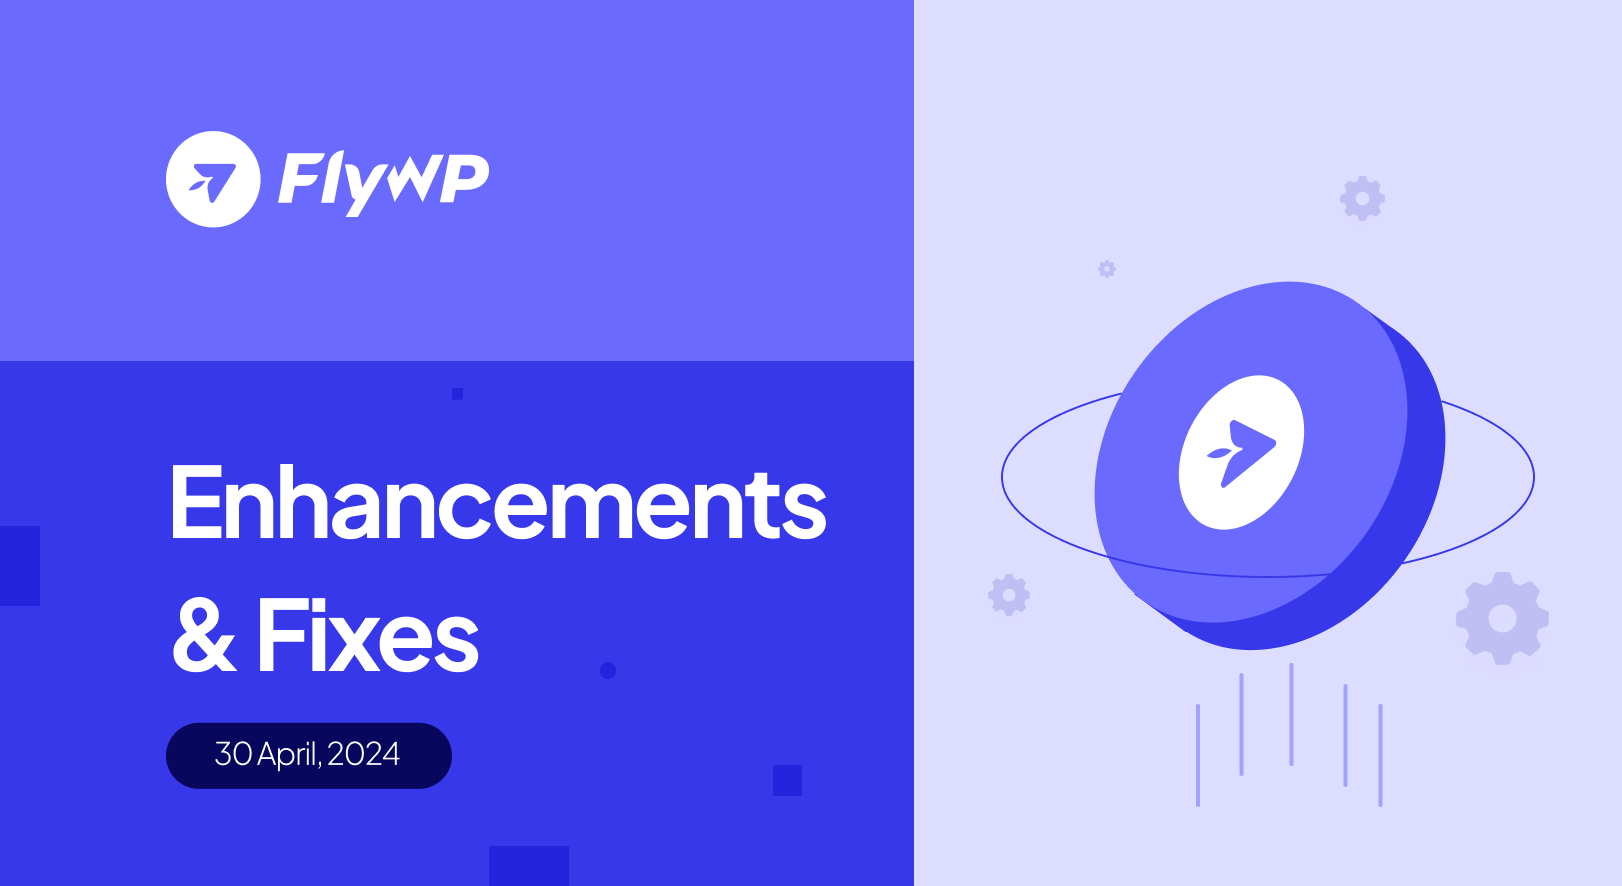 New enhancements and fixes of FlyWP